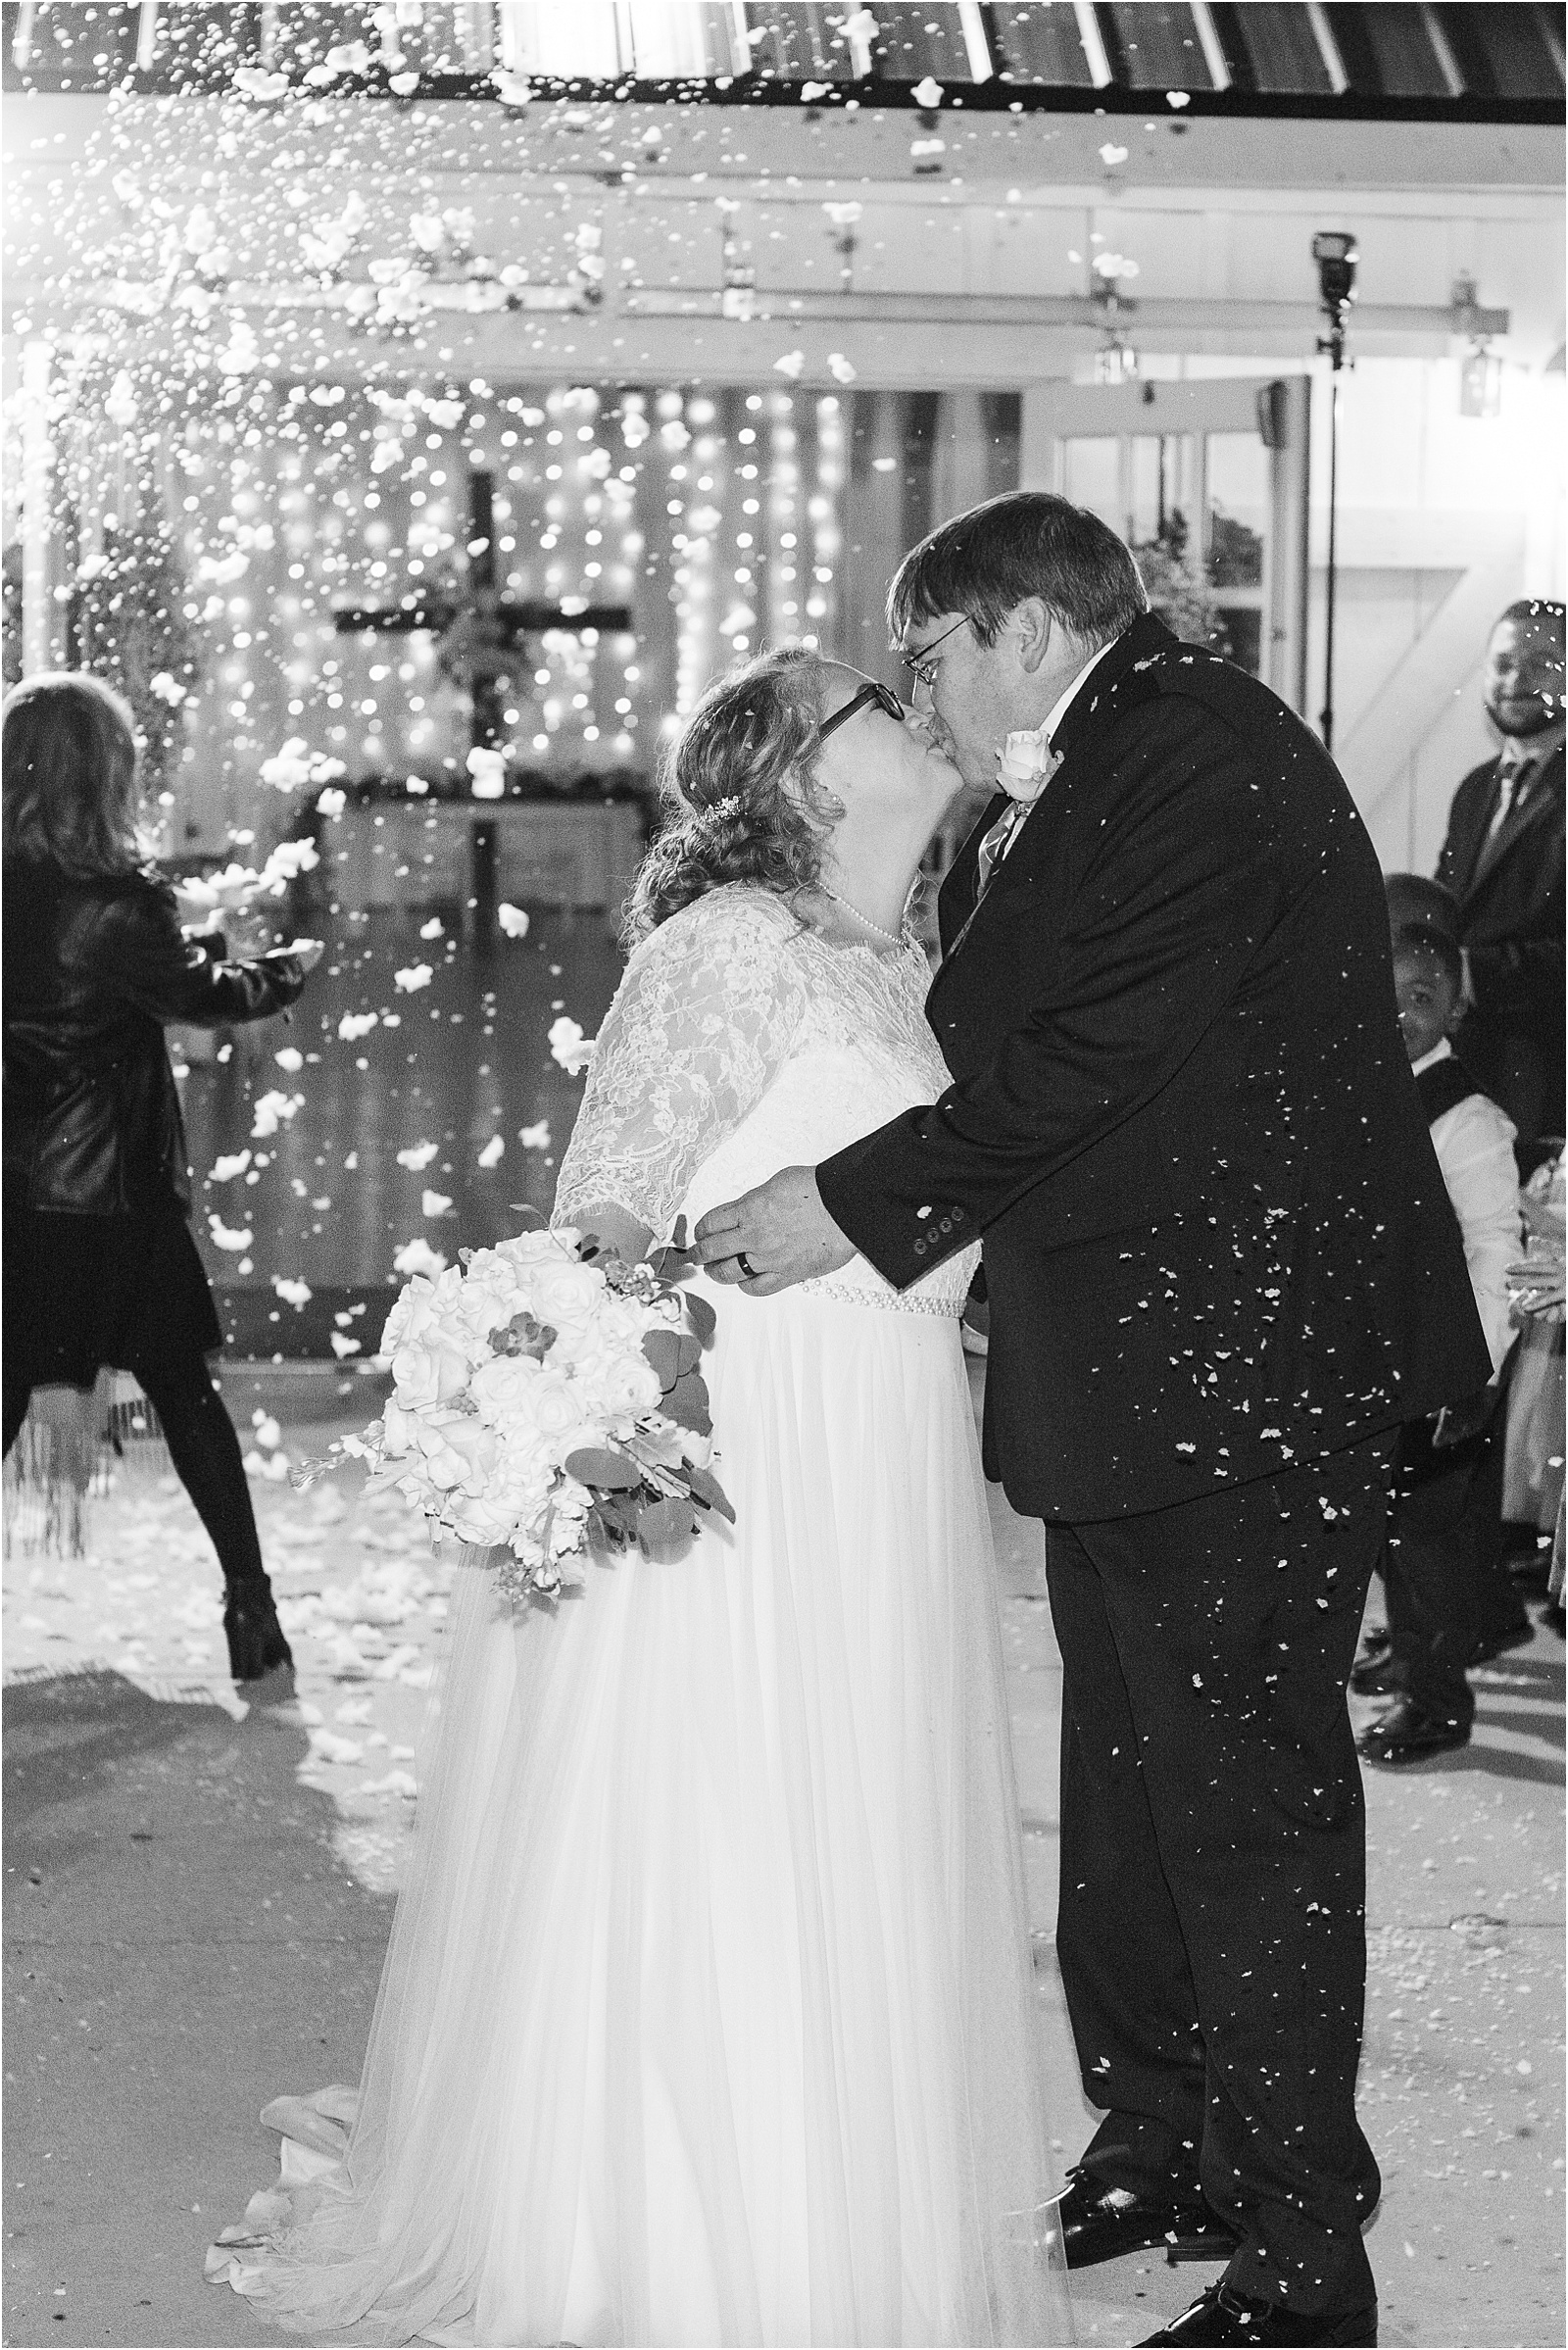 Christmas wedding couple leaving their reception in snow